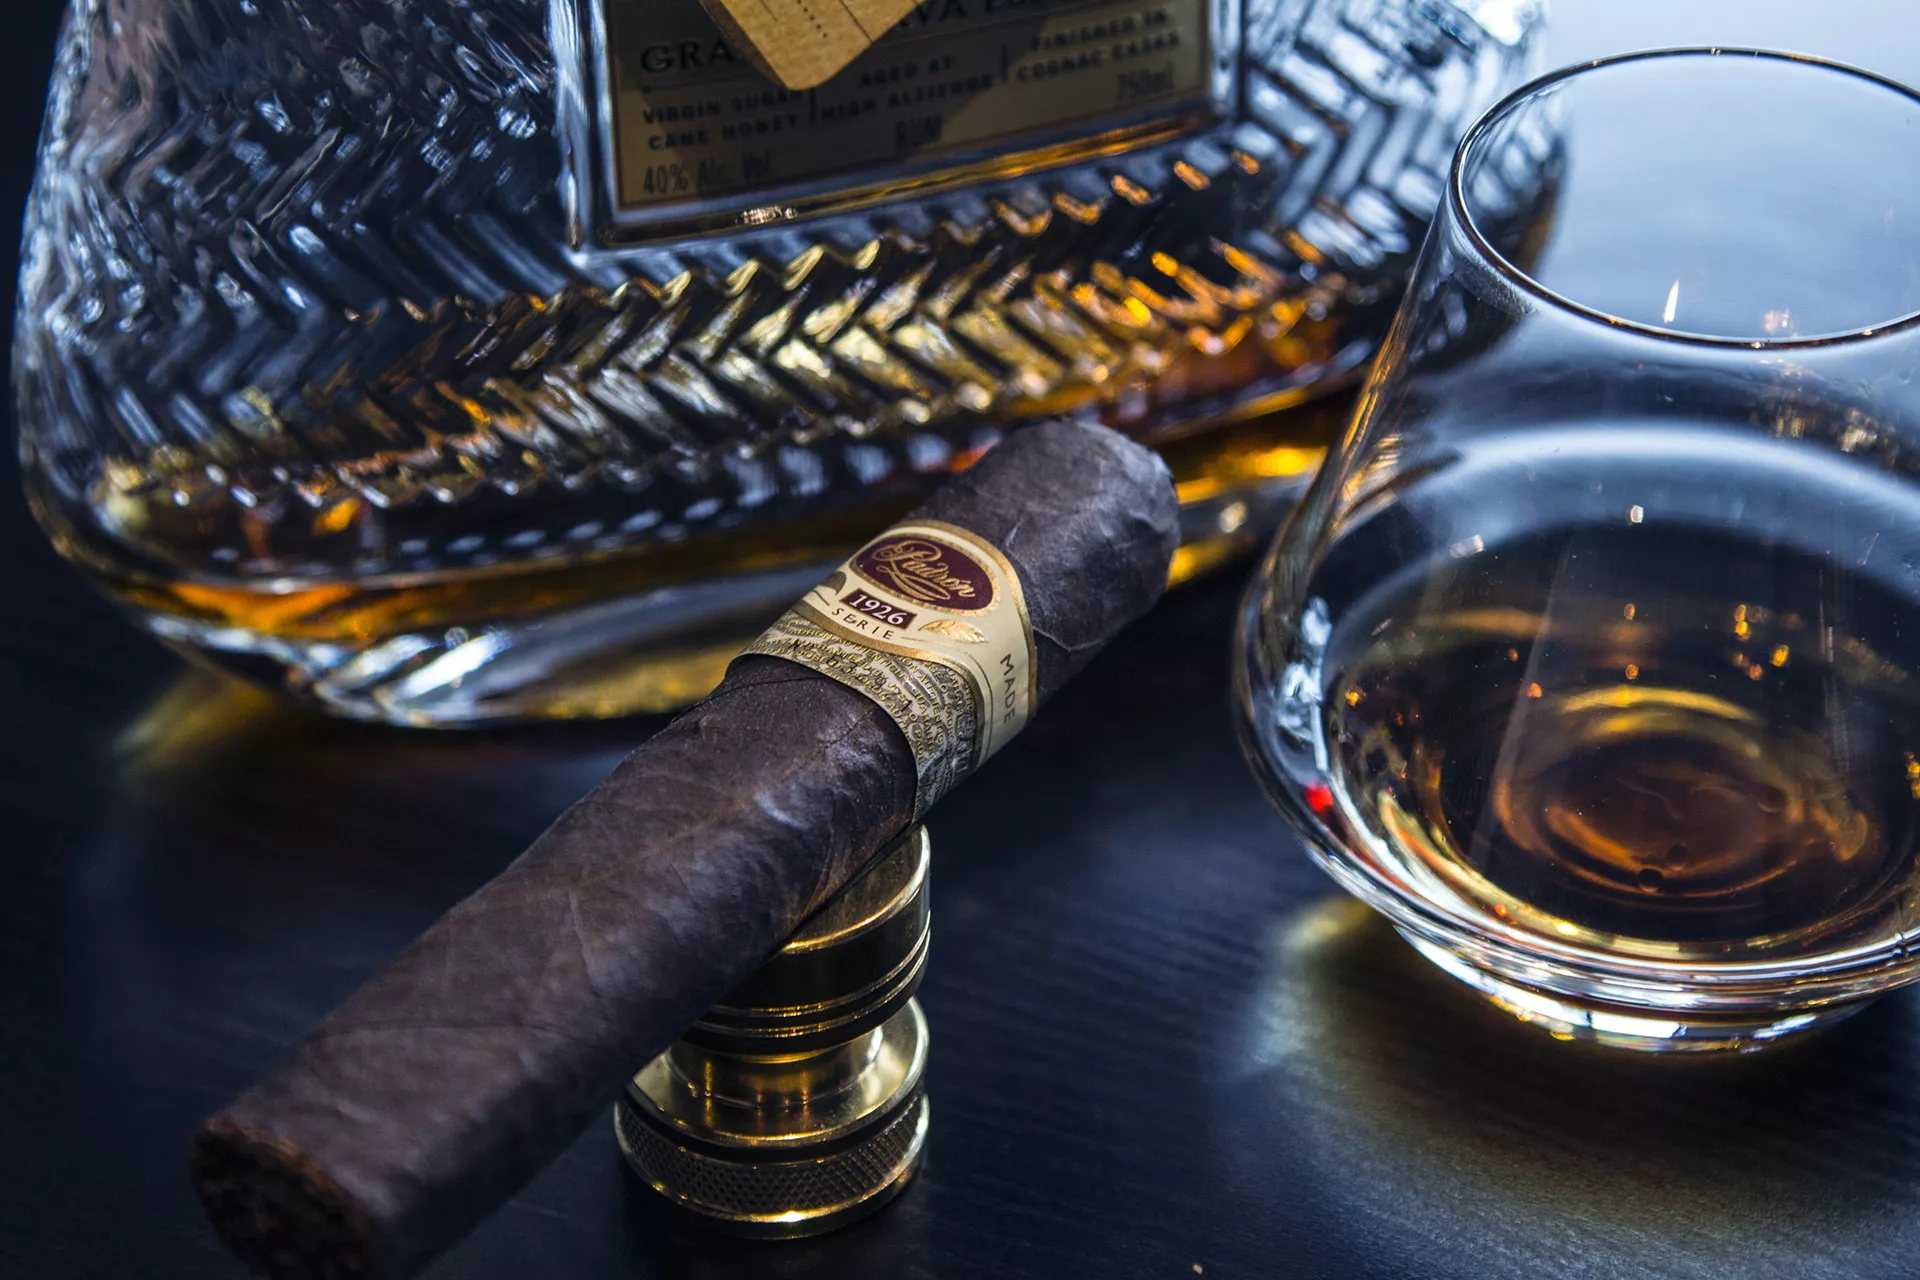 Cigar on stand next to a glass and bottle of liquor.